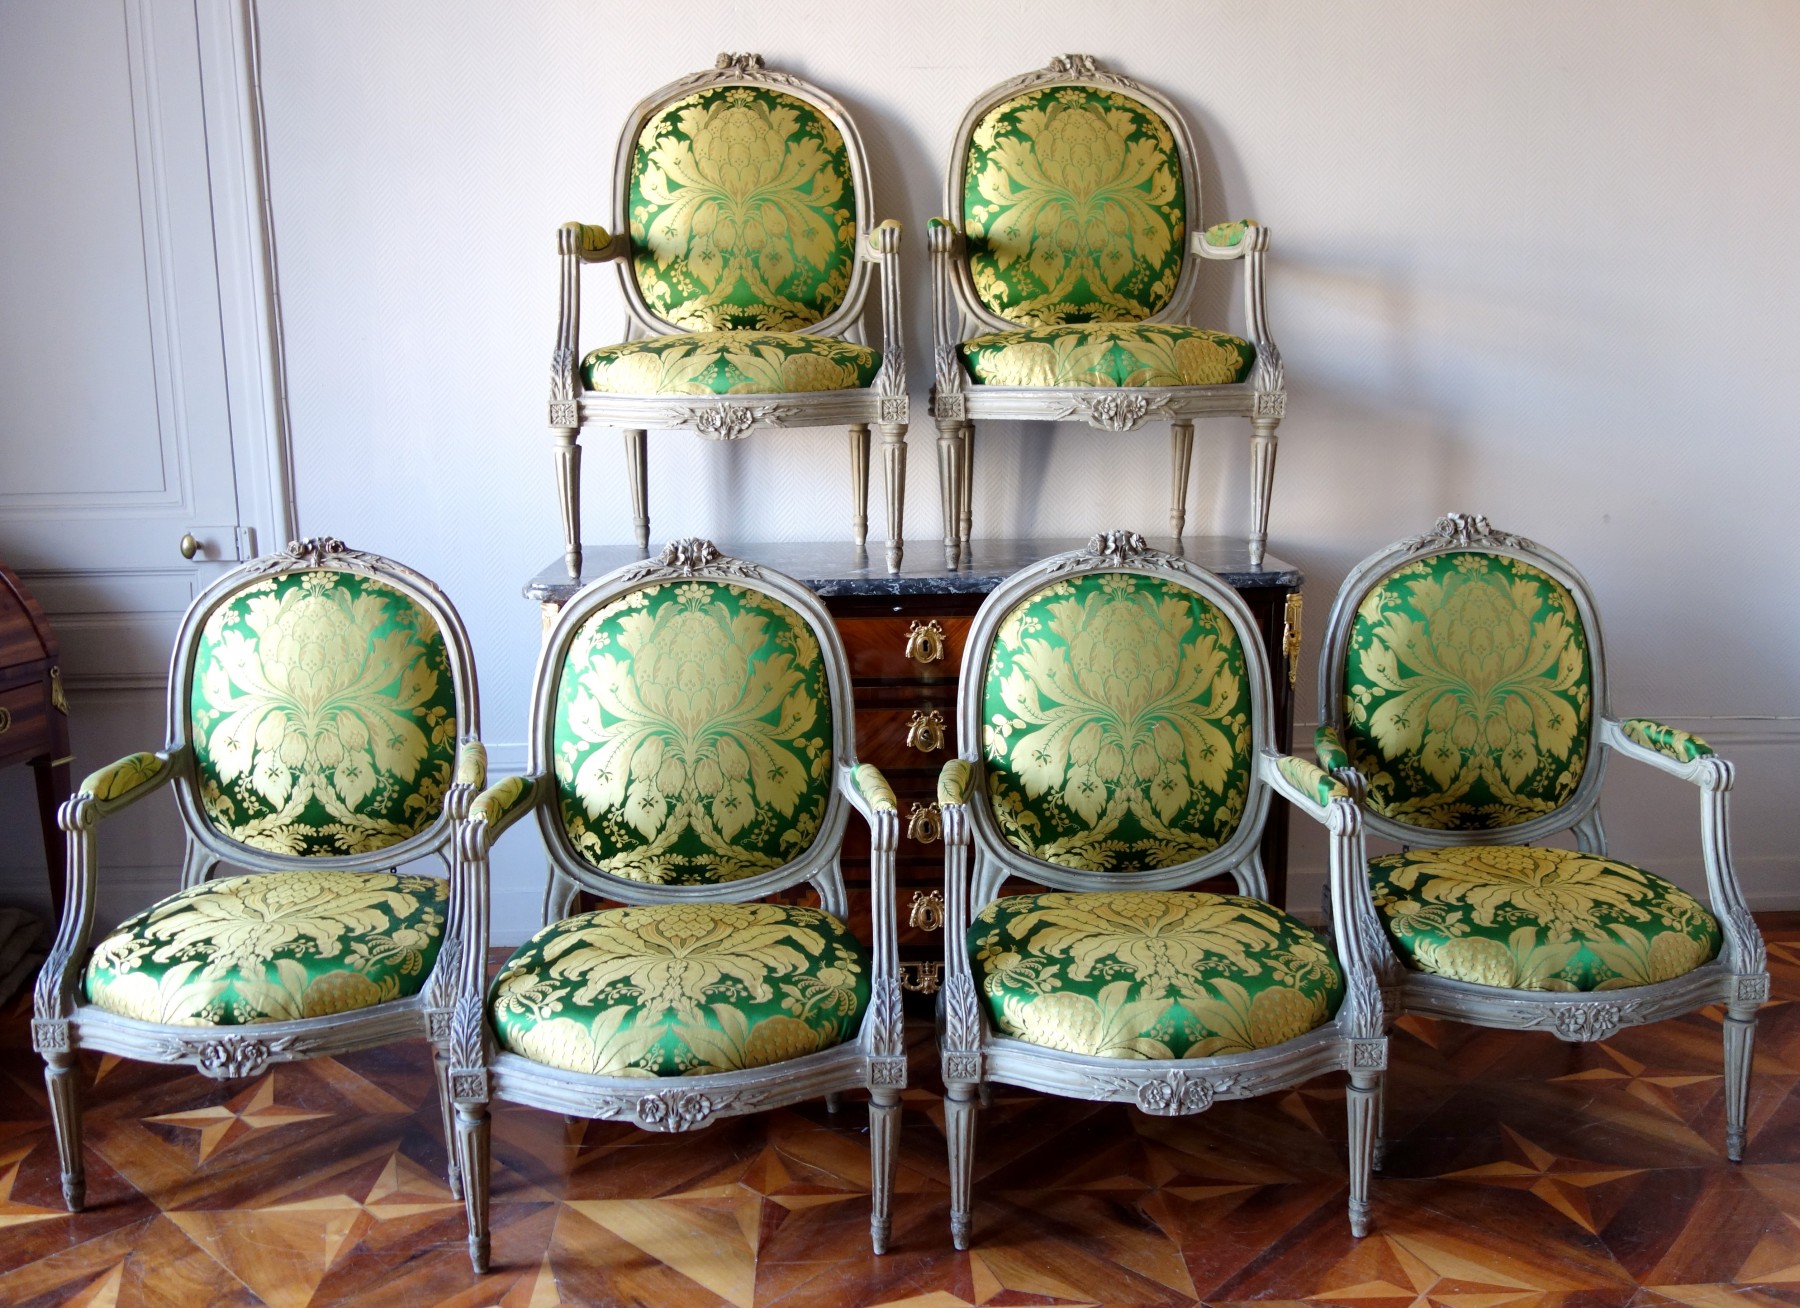 French Louis XV Fauteuils Chairs in Original Finish and Fabric